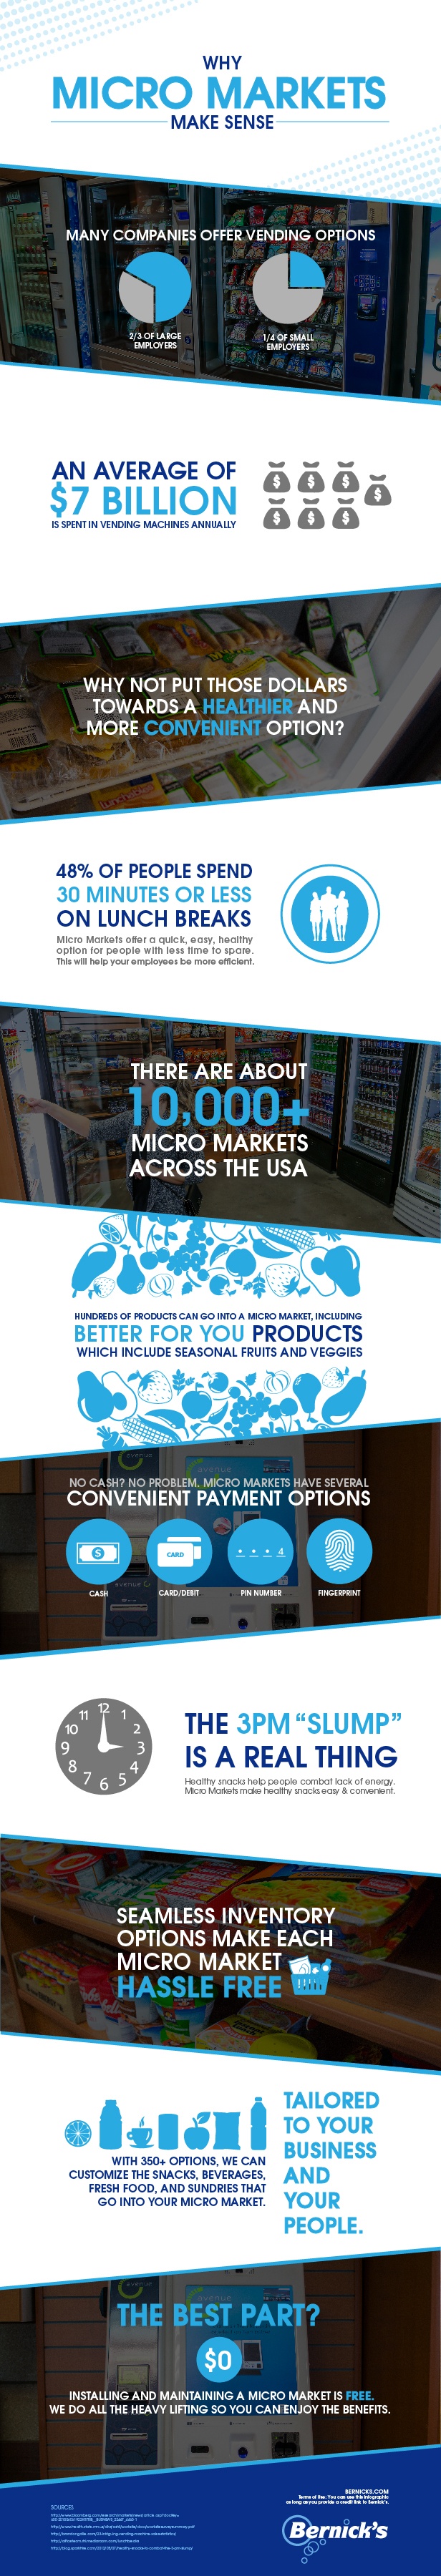 MicroMarkets-Infographic-FINAL